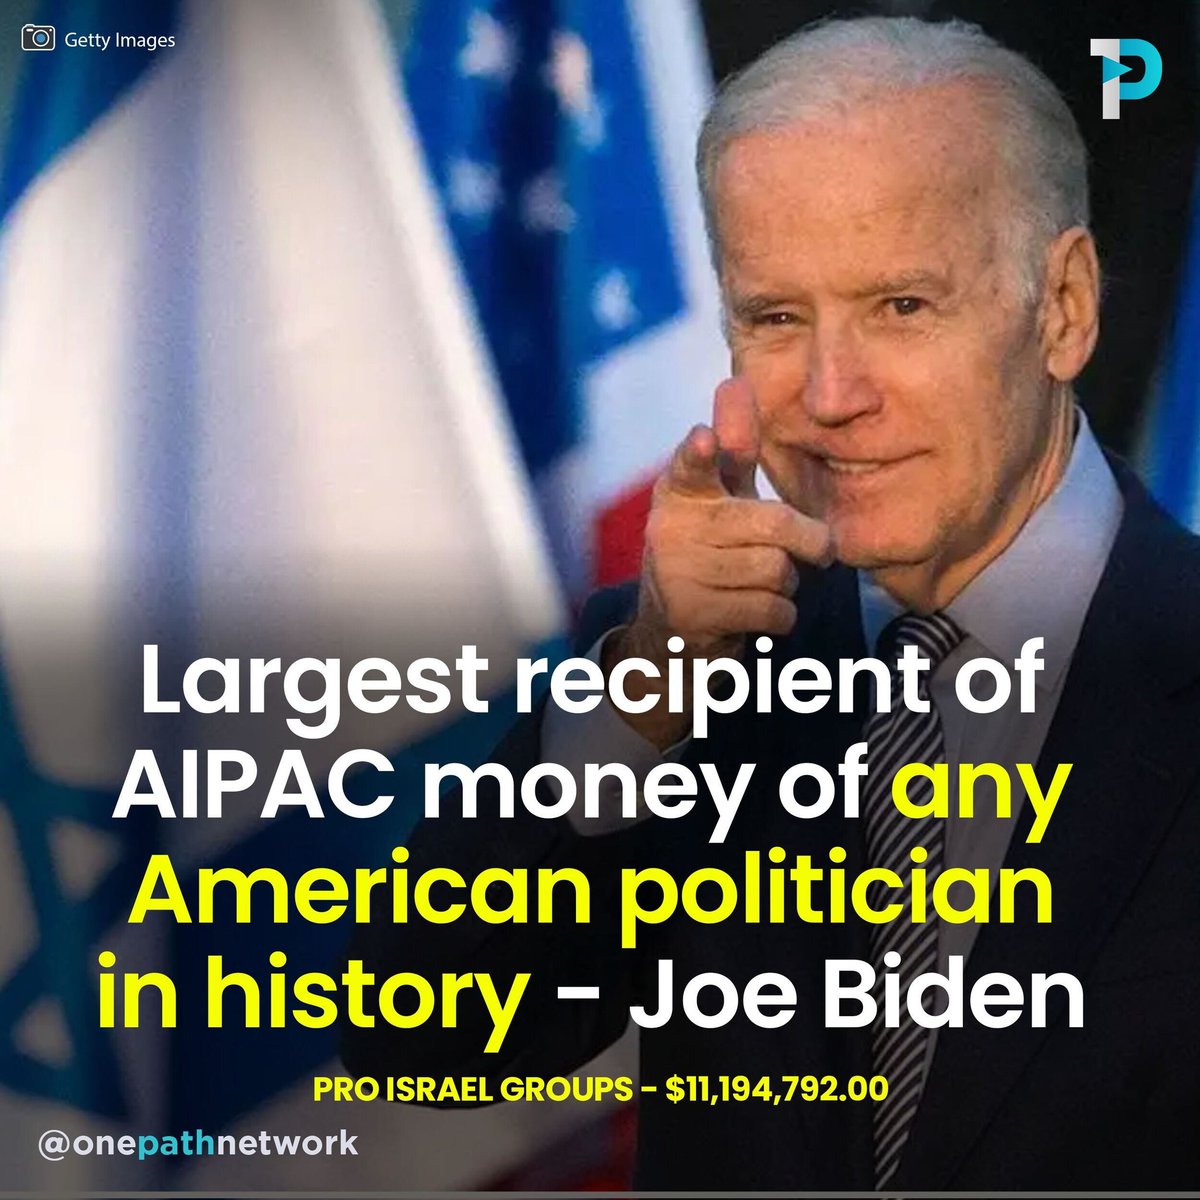 Of course someone would be a lifelong Zionist genocide supporter and feed them weapons when youre paid $11 million dollars.